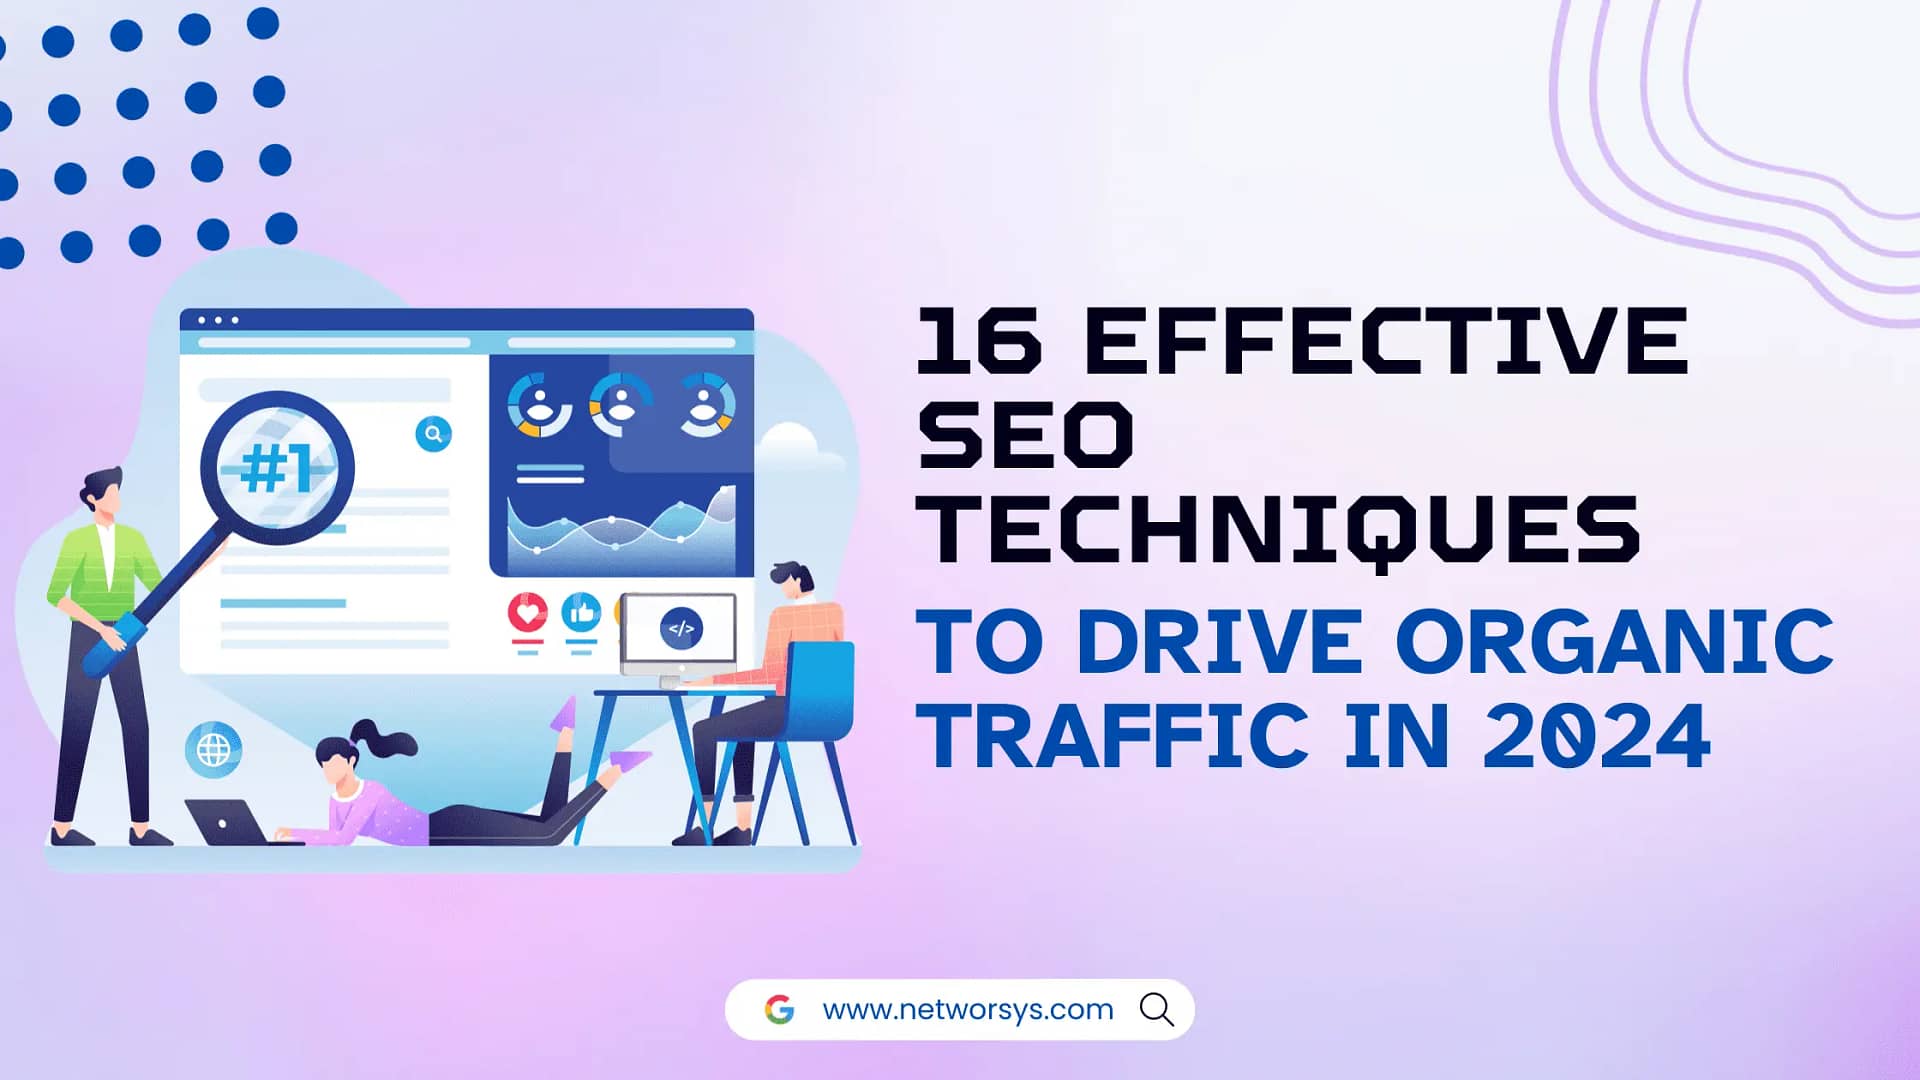 SEO Techniques to Drive Organic Traffic in 2024